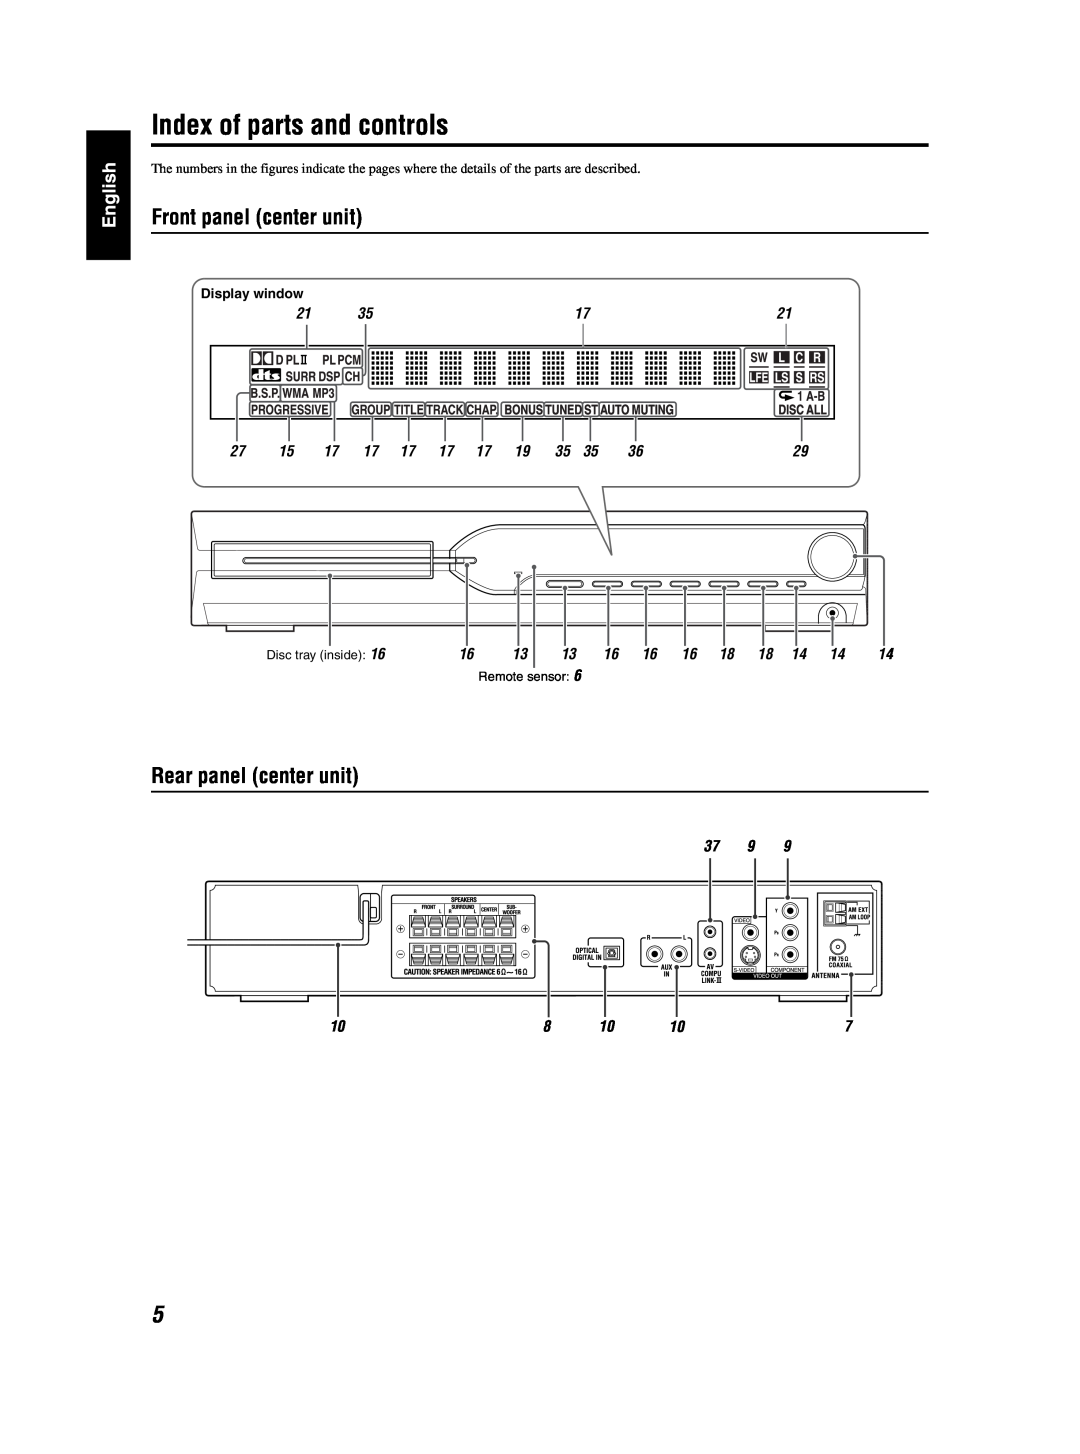 JVC TH-S3 TH-S2 manual Index of parts and controls, Front panel center unit, Rear panel center unit 